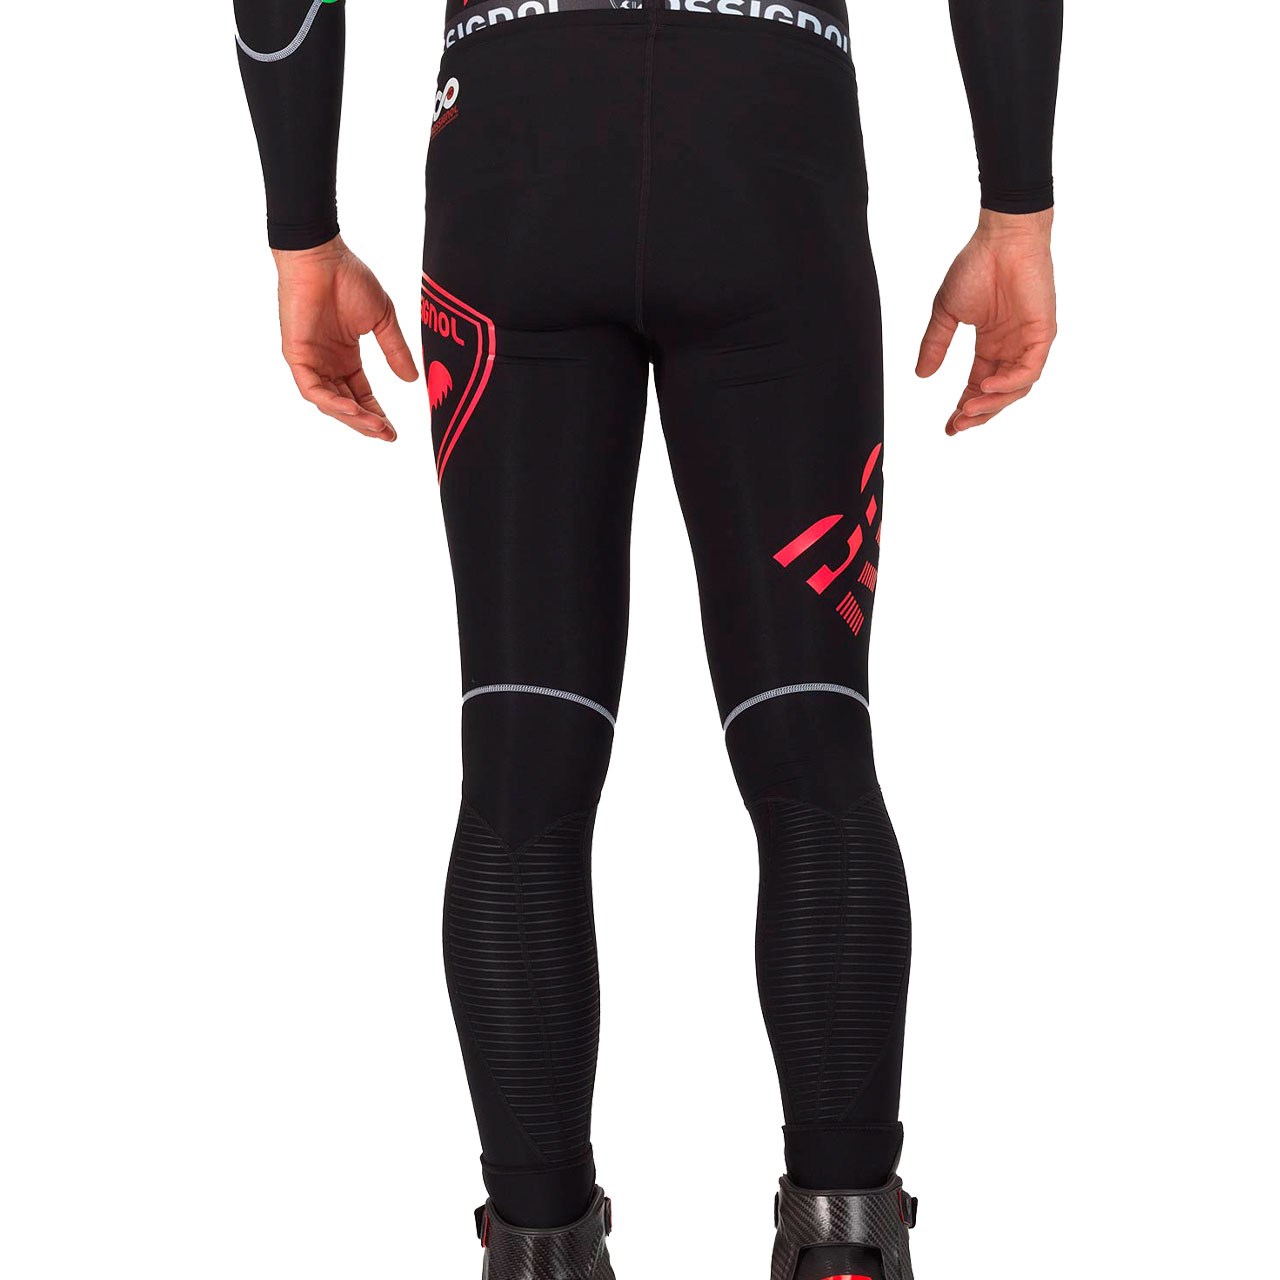 Rossignol - Infini Compression Race Tights - Running trousers - Men's